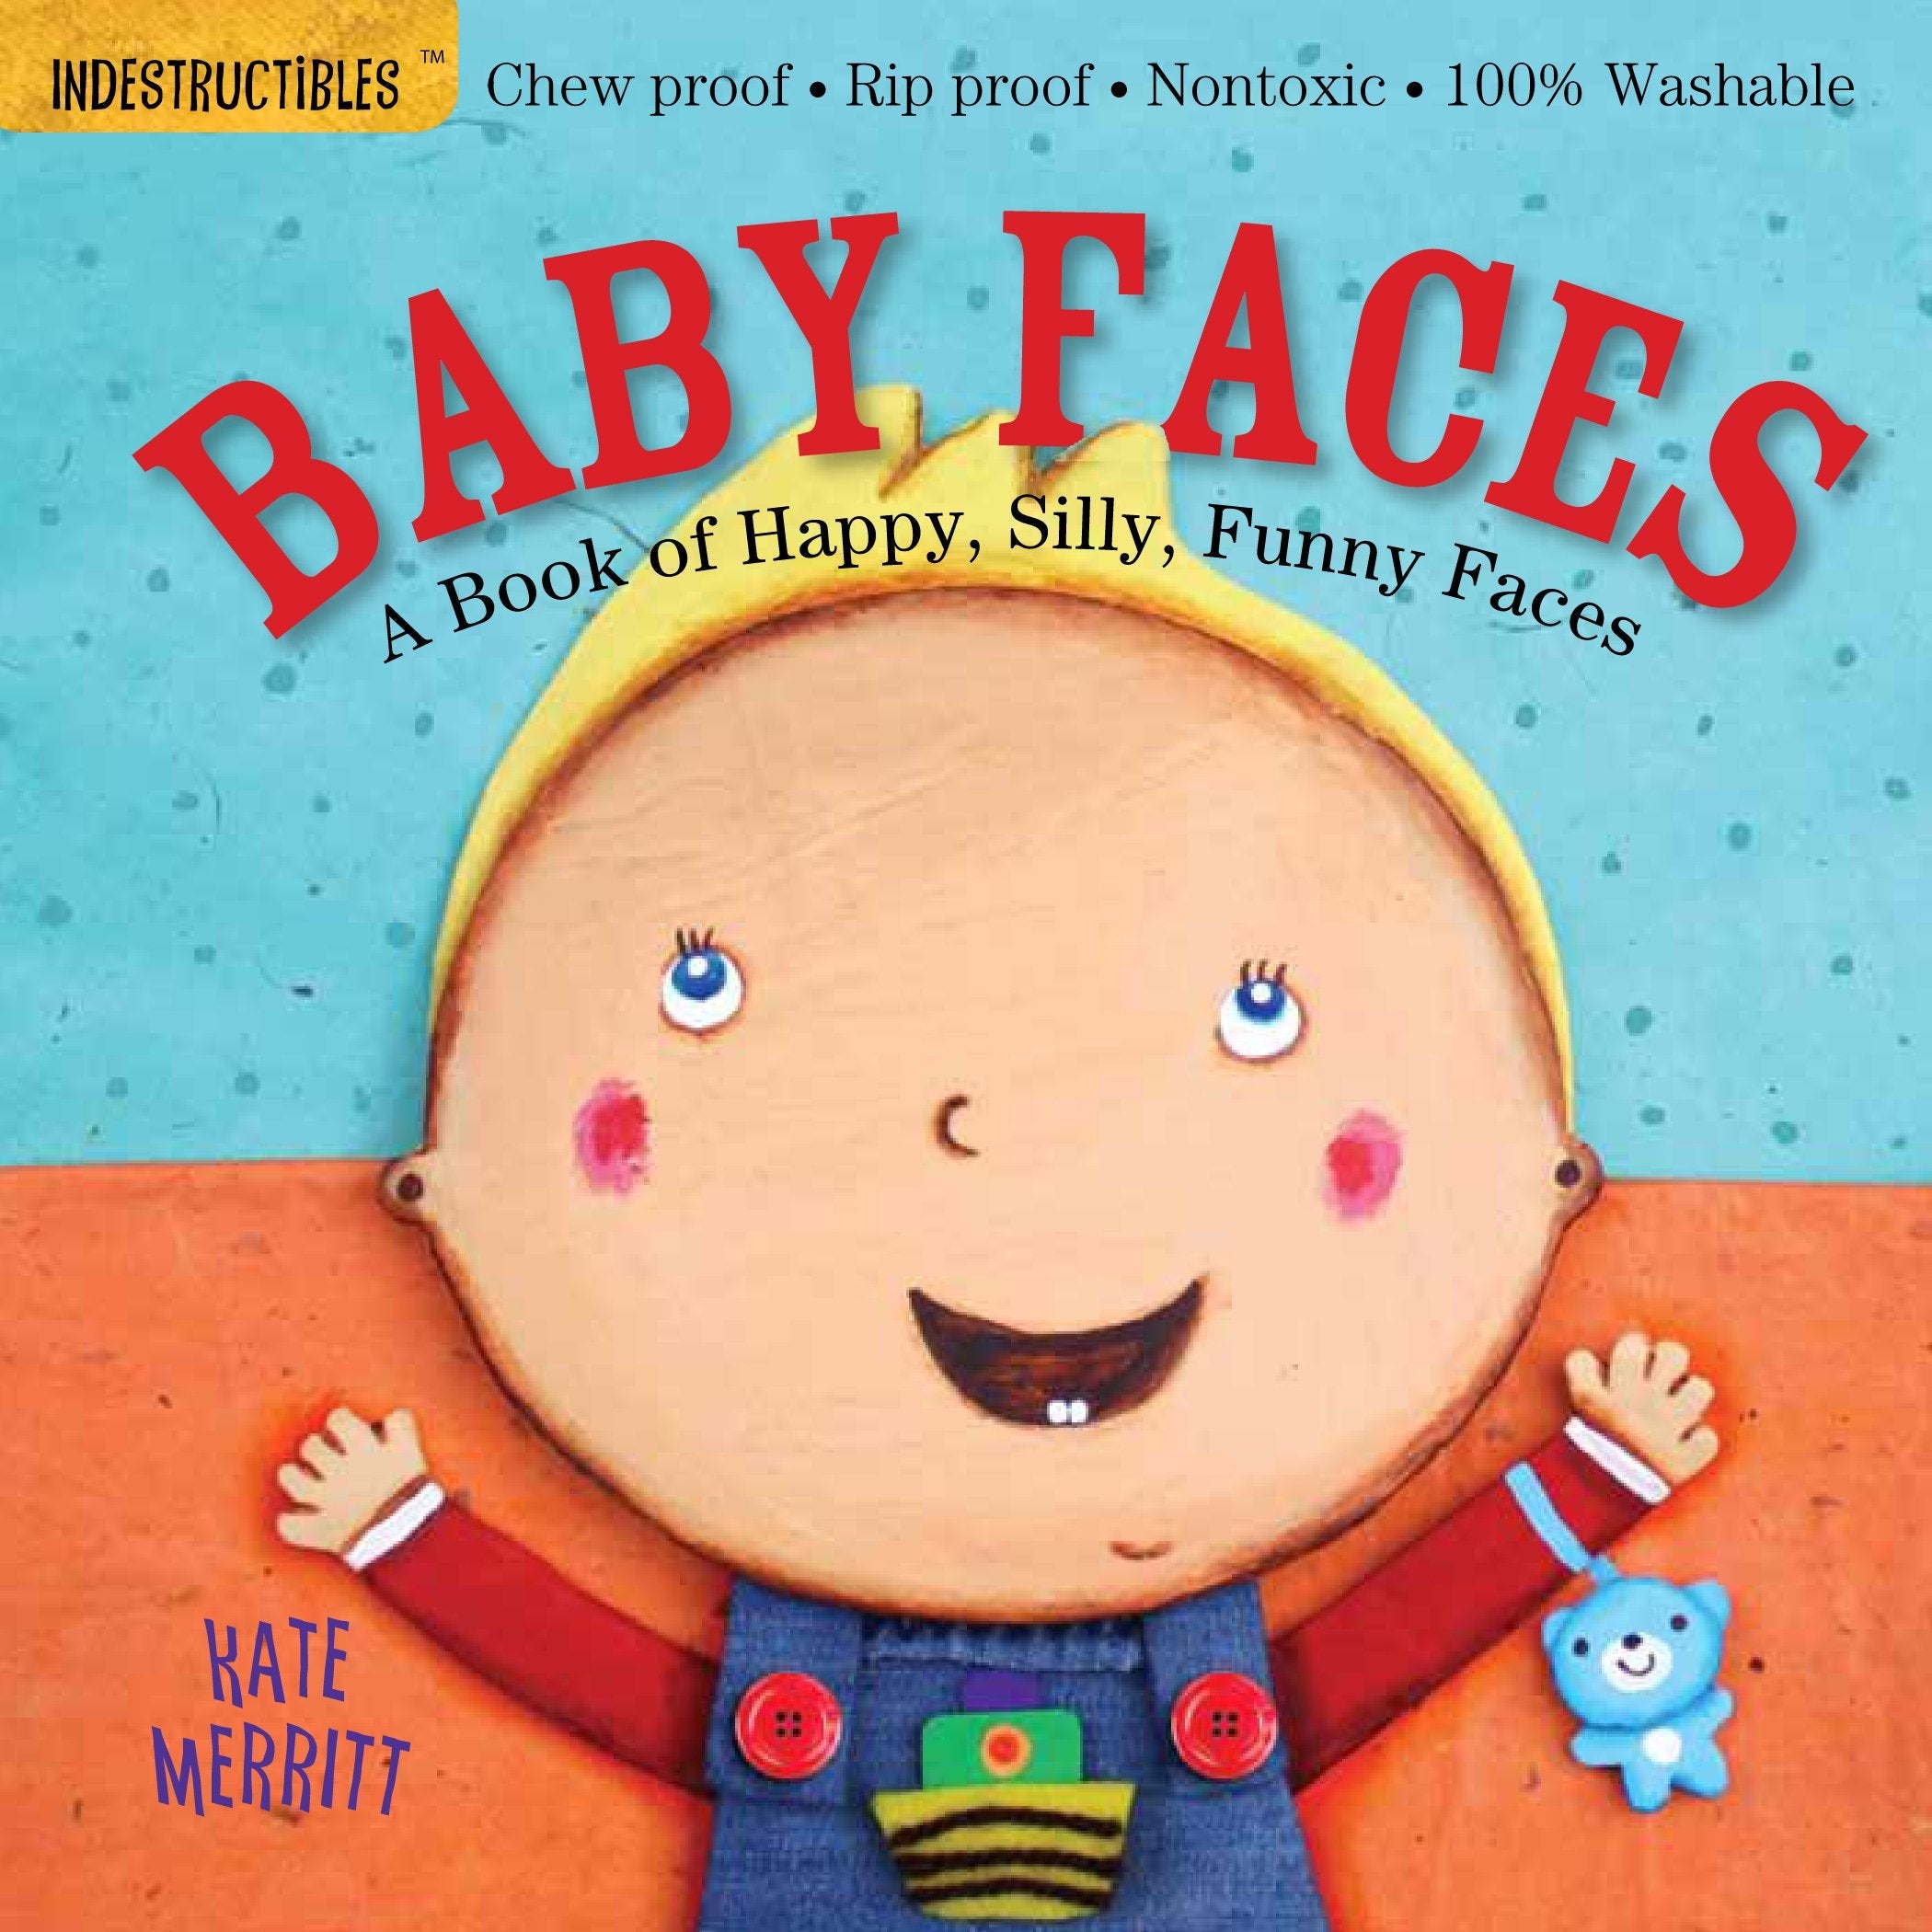 Indestructibles: Baby Faces: A Book of Happy, Silly, Funny Faces-HACHETTE BOOK GROUP USA-Little Giant Kidz